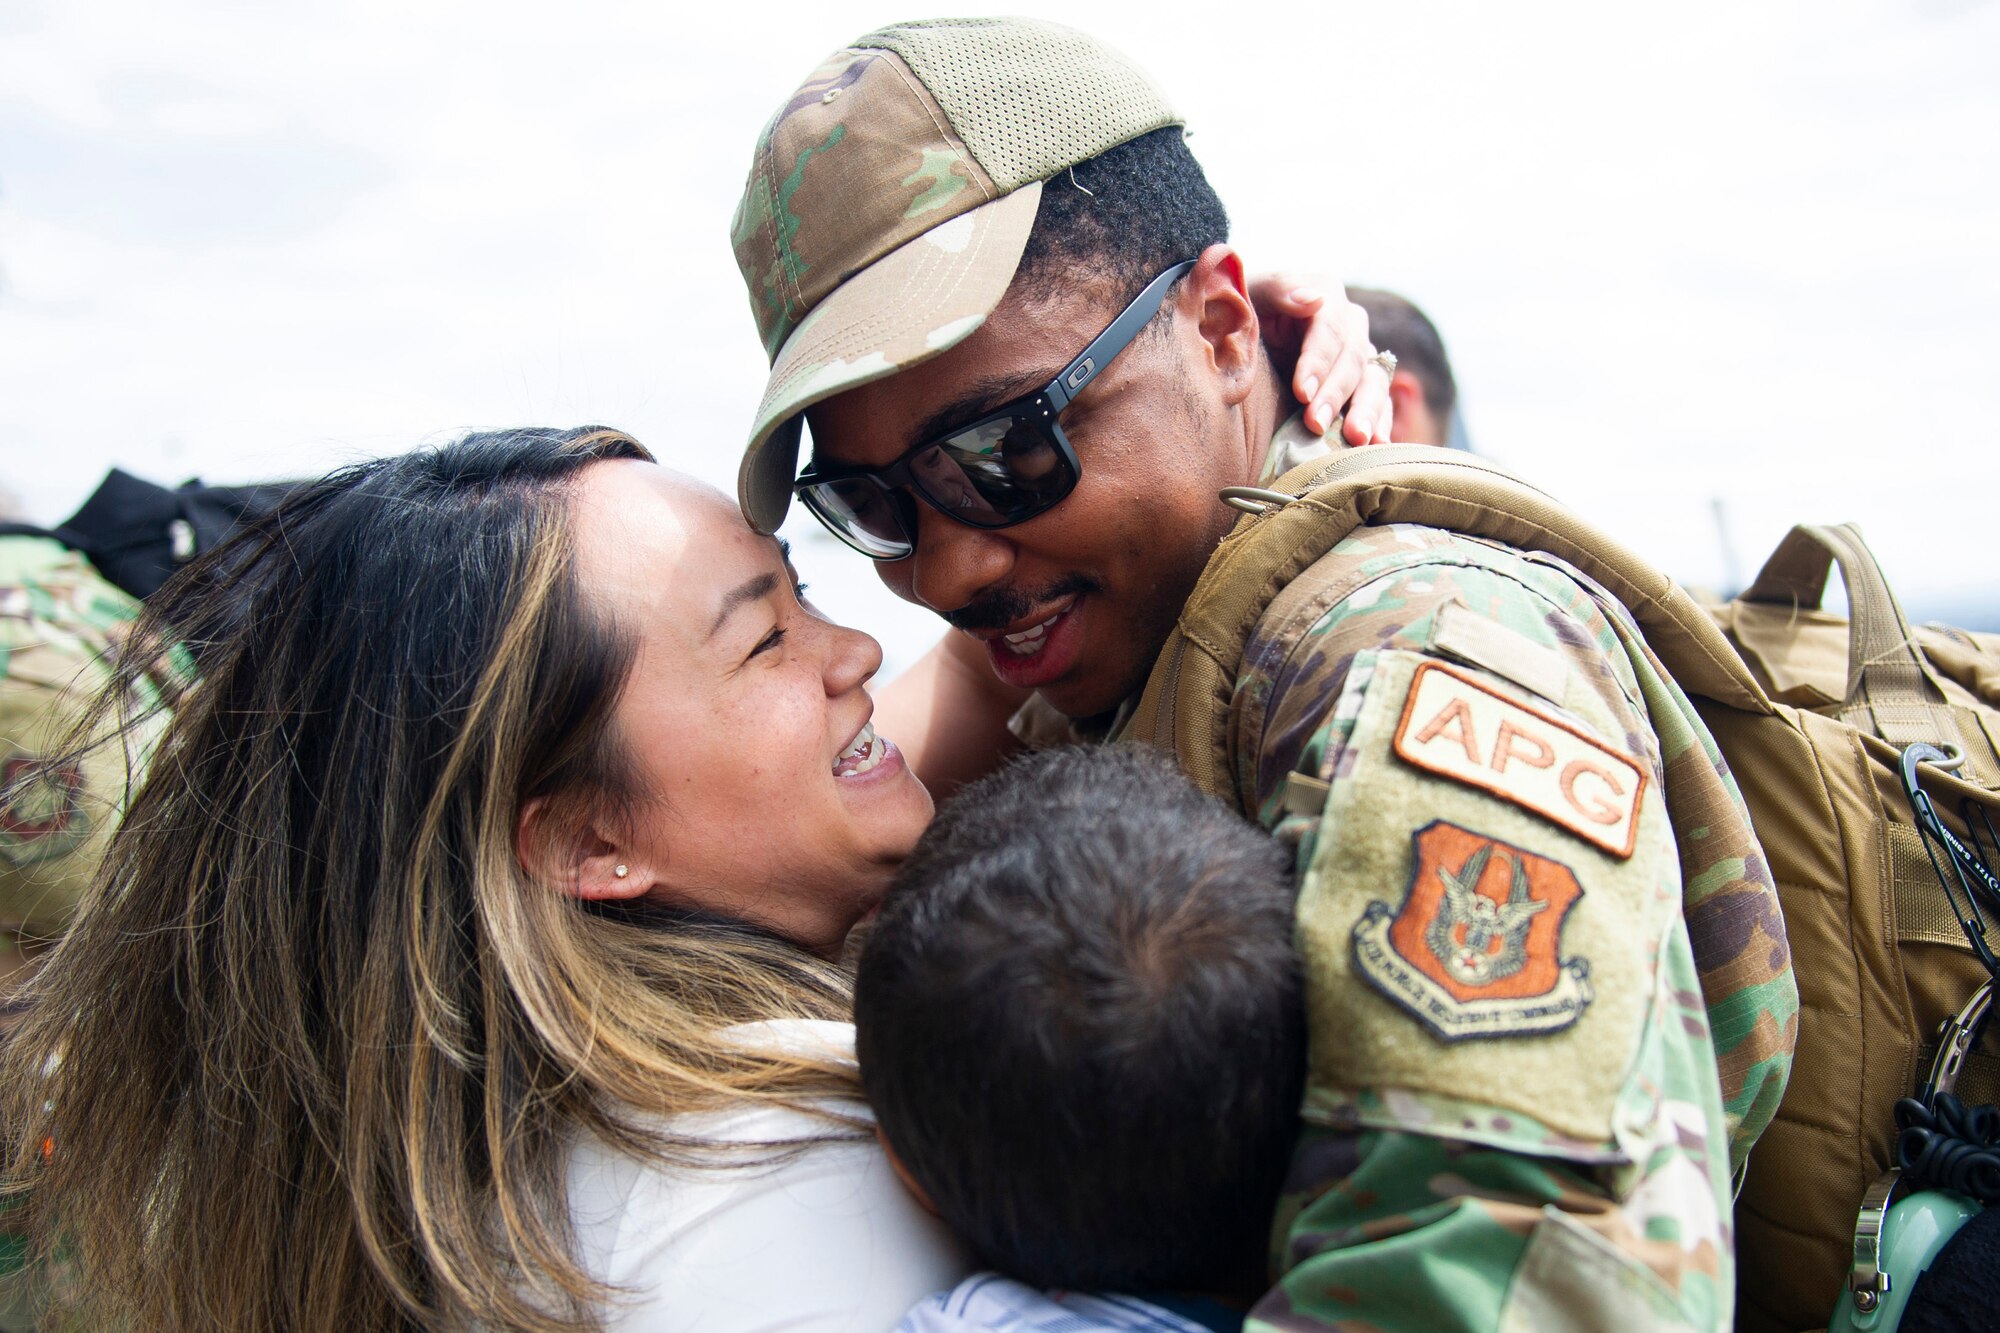 Staff Sgt. Darrell Anderson, 934th Aircraft Maintenance Squadron, hugs his wife Felicia and son after returning from a three-month deployment to Europe on May 19, 2022, at Minneapolis-St. Paul Air Reserve Station. The 934th Airlift Wing performed tactical airlifts and vital aeromedical evacuations in support of U.S. European Command to assure our Allies and Partners in the region and deter any future aggression. (U.S. Air Force Picture by Chris Farley)